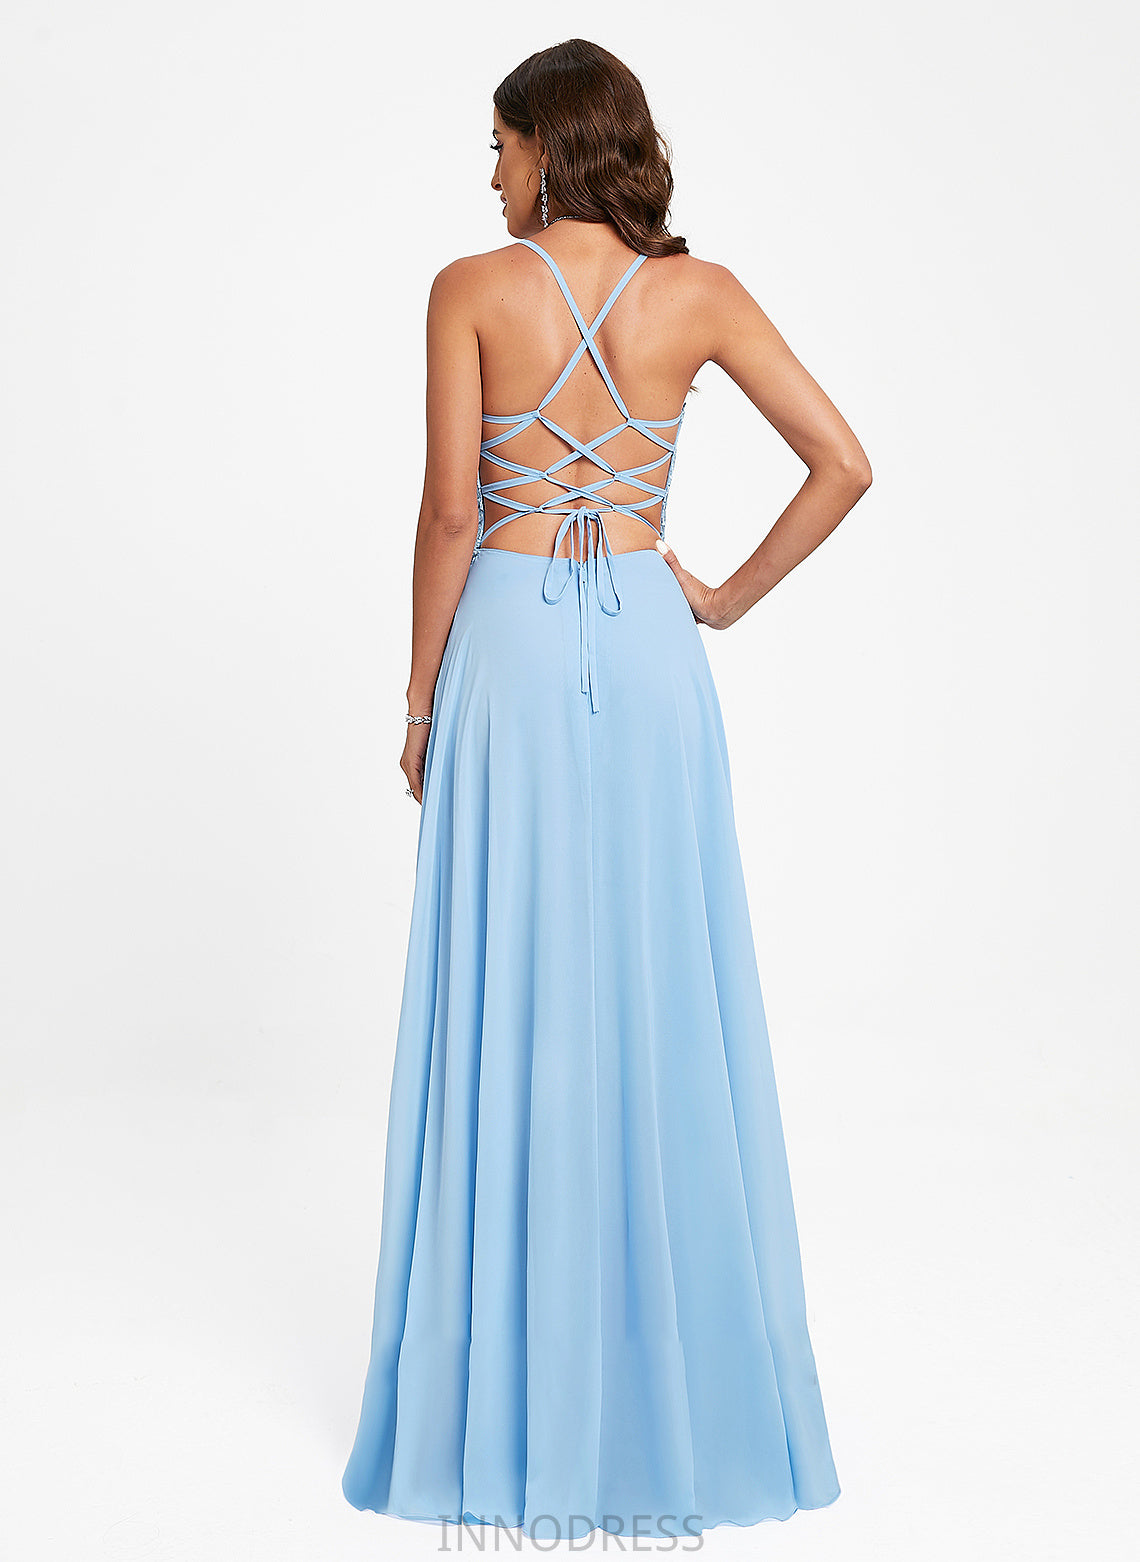 Prom Dresses V-neck Floor-Length A-Line With Lace Savanah Chiffon